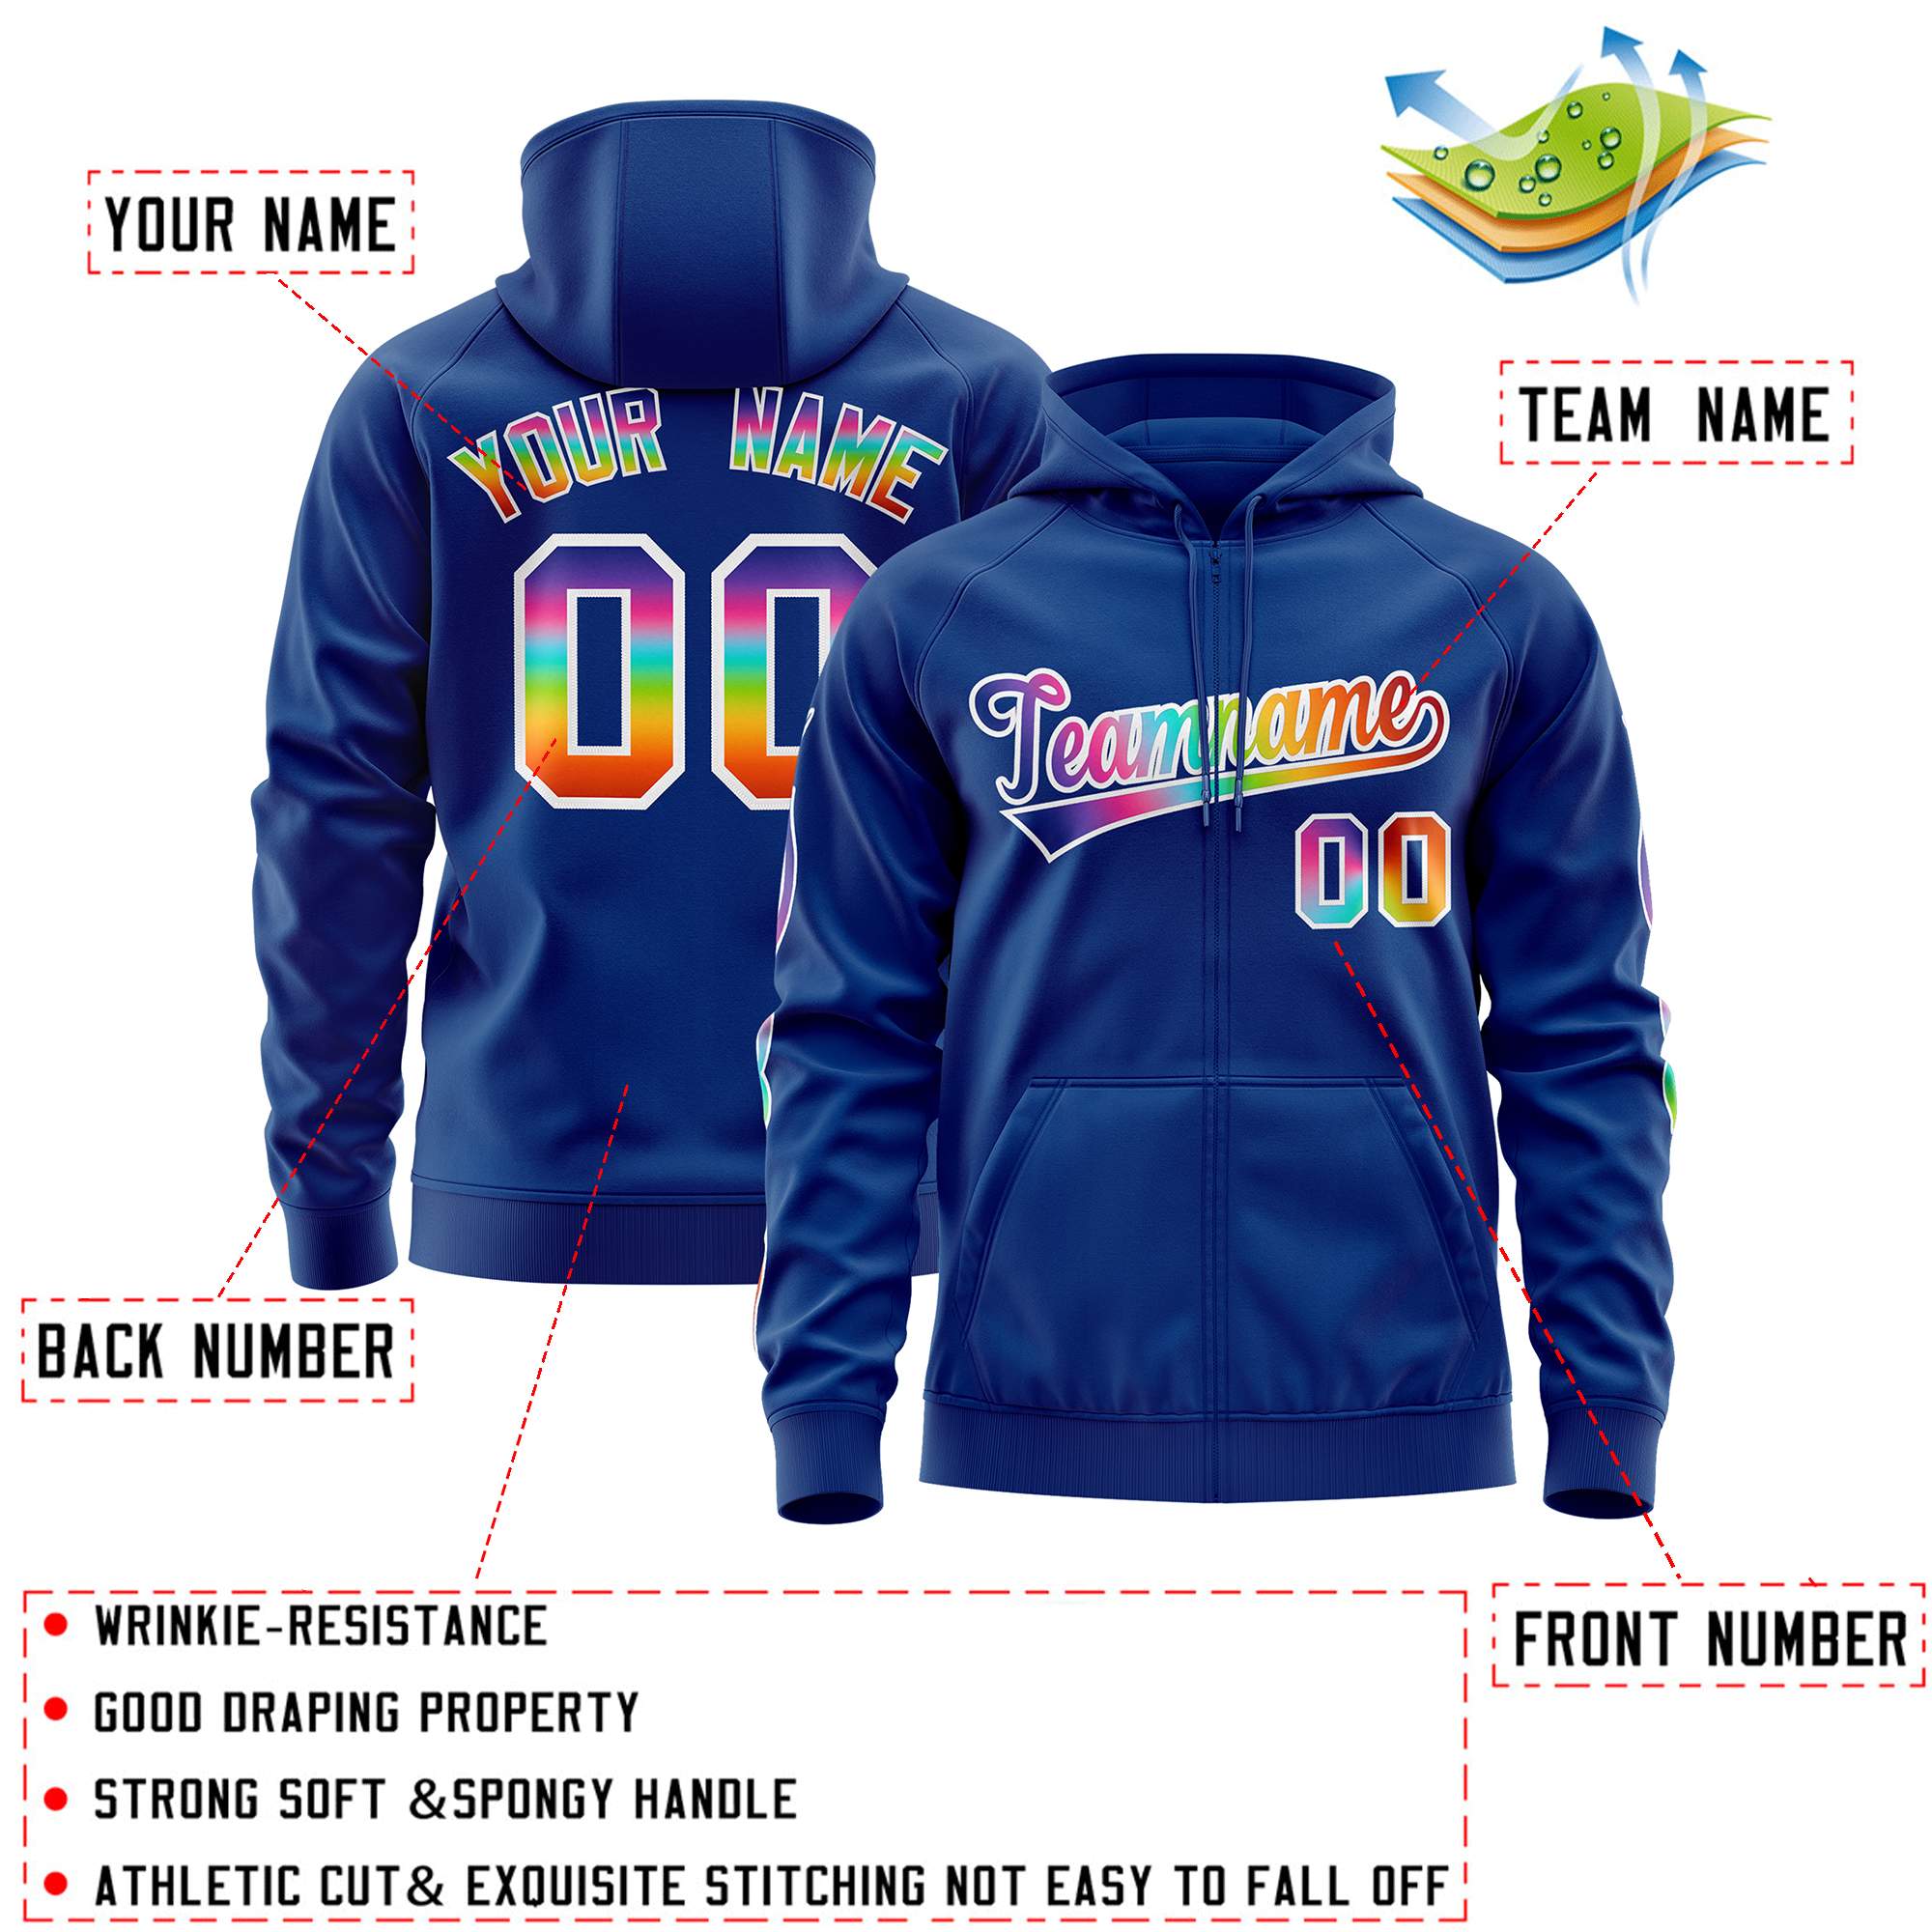 Custom Stitched Royal White Sports Full-Zip Sweatshirt Hoodie with Colored Flames